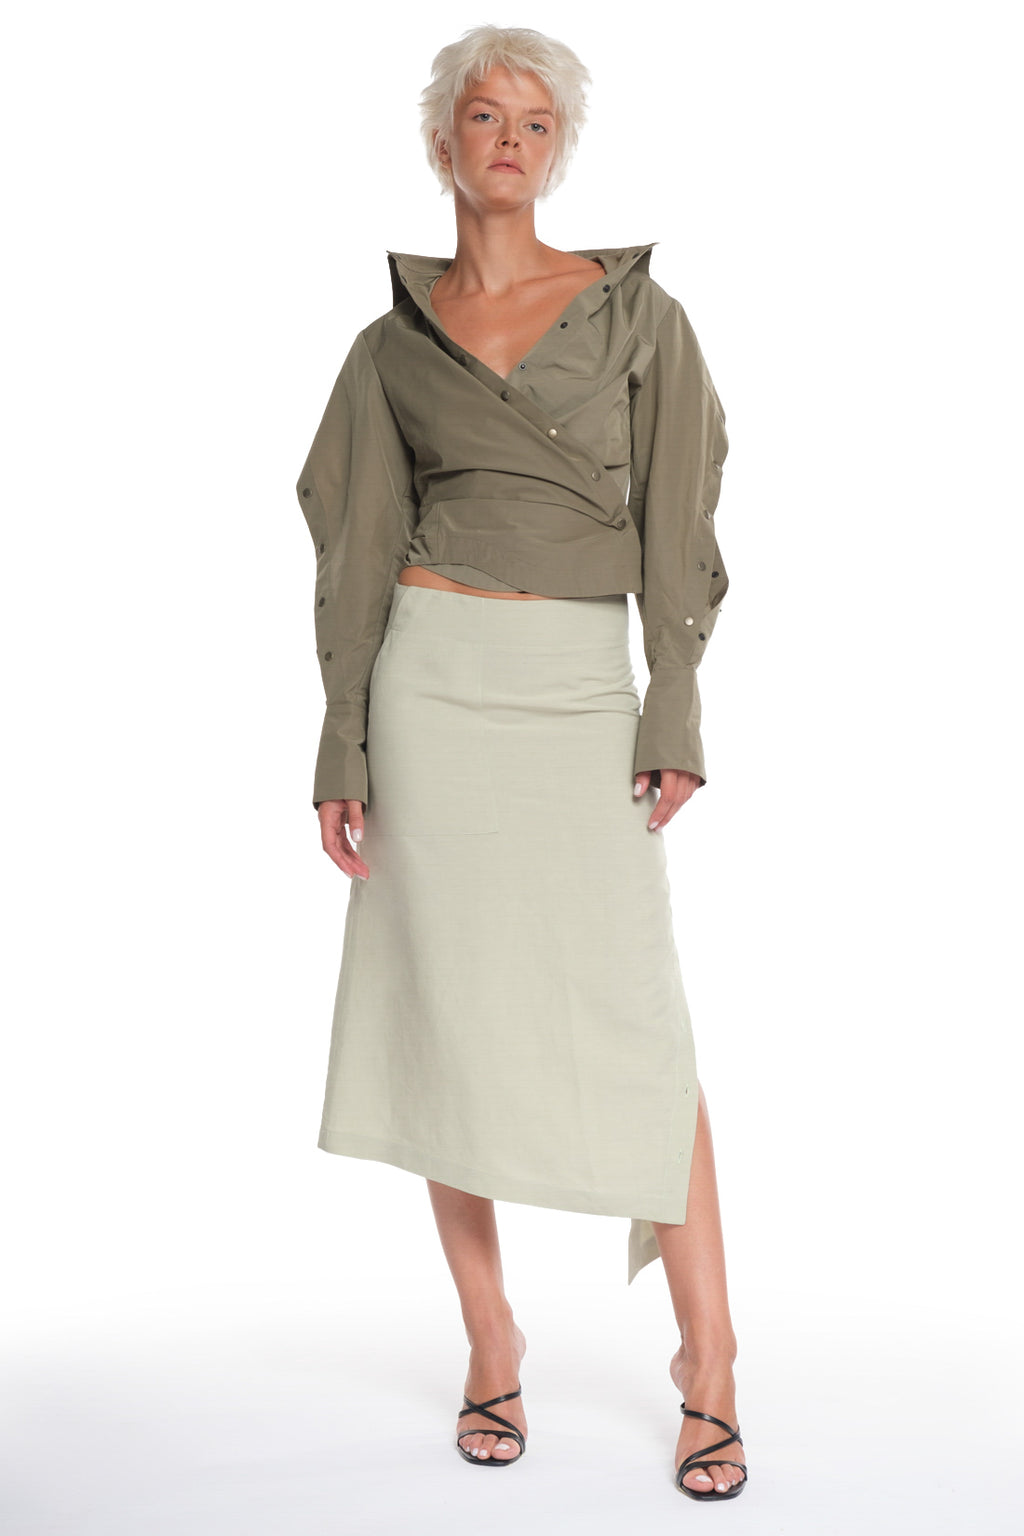 ASYMMETRICAL LONG SKIRT WITH CUTTING AND BUTTONING ON THE SIDE